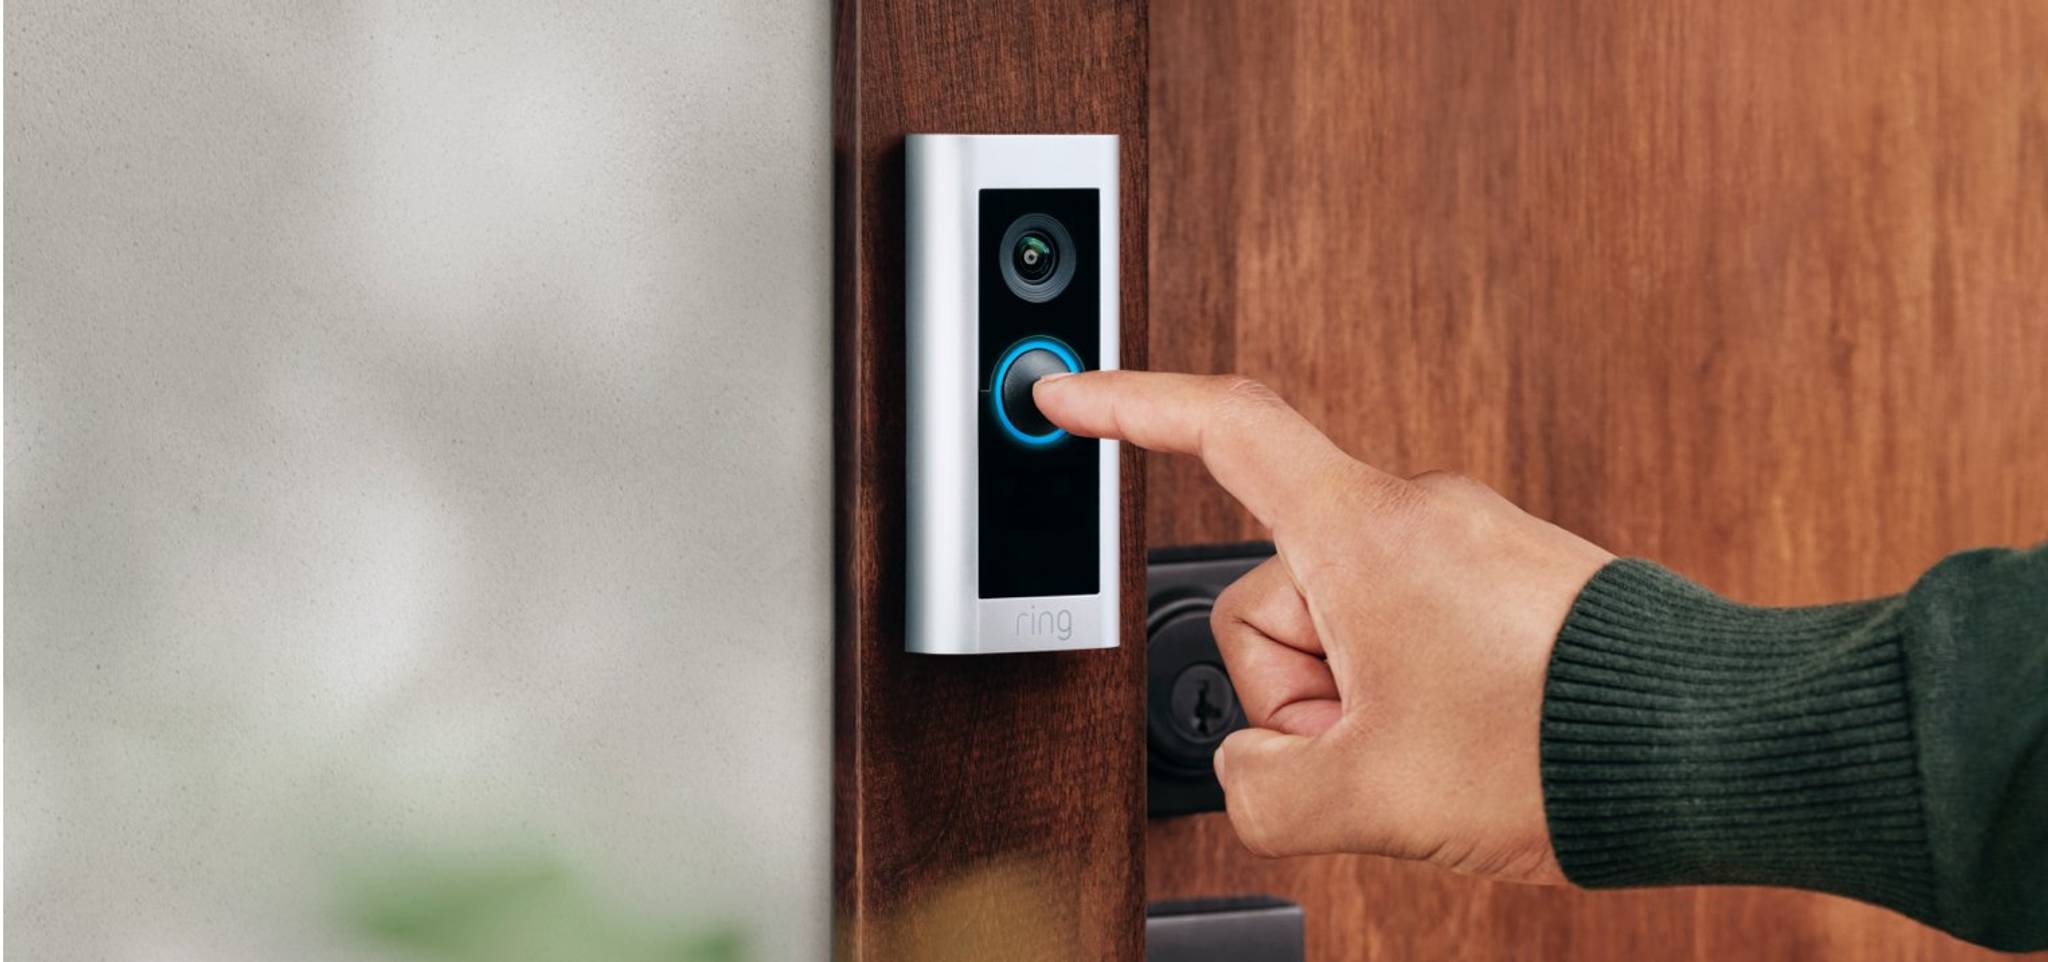 Amazon’s Ring doorbell raises privacy concerns in US